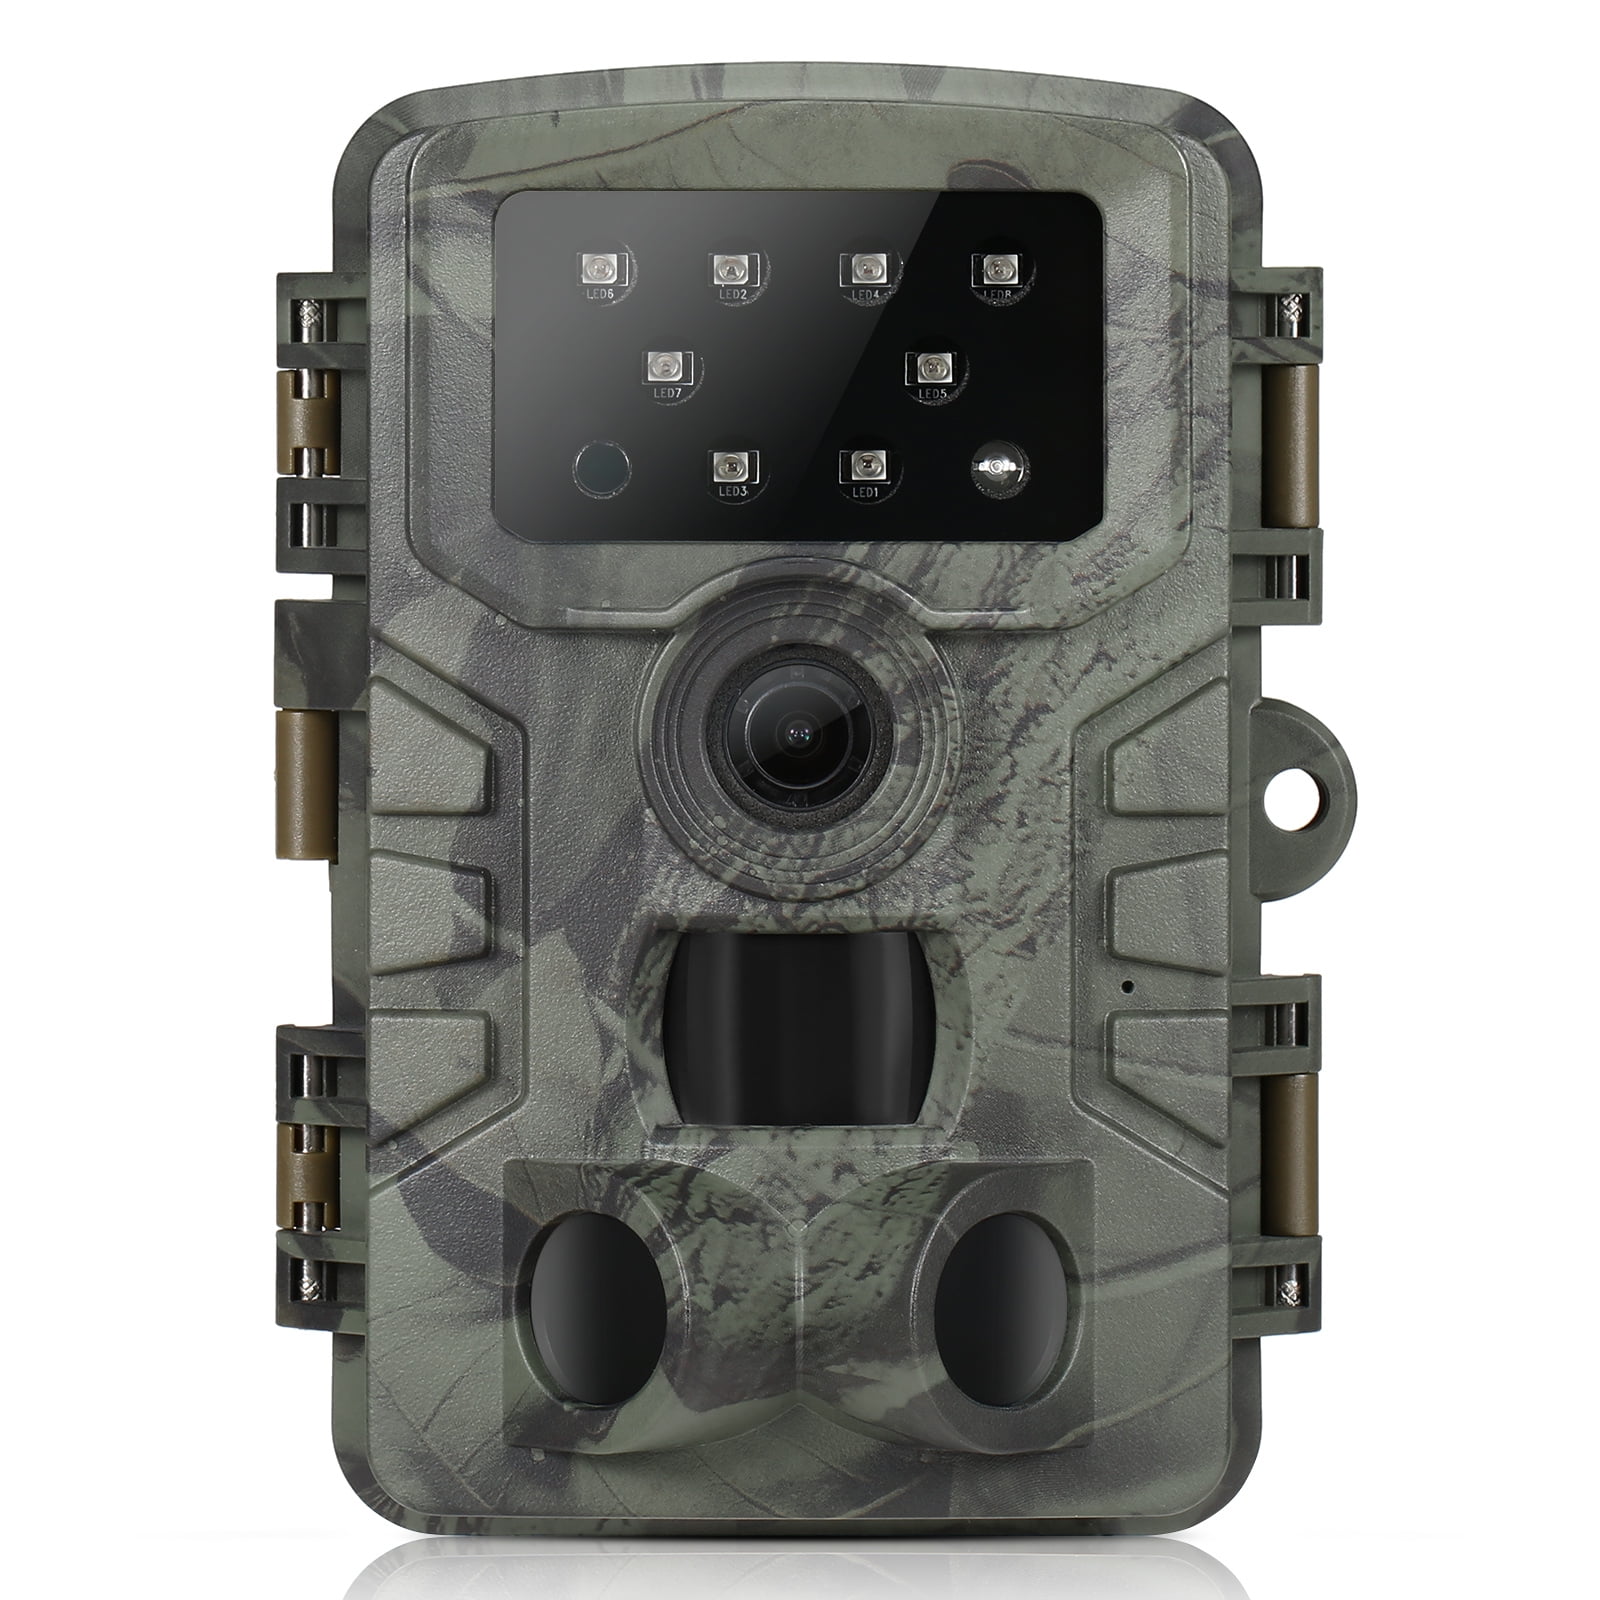 Foxelli Trail Camera 20mp 1080p HD Wildlife Scouting Hunting Camera With MOT for sale online 